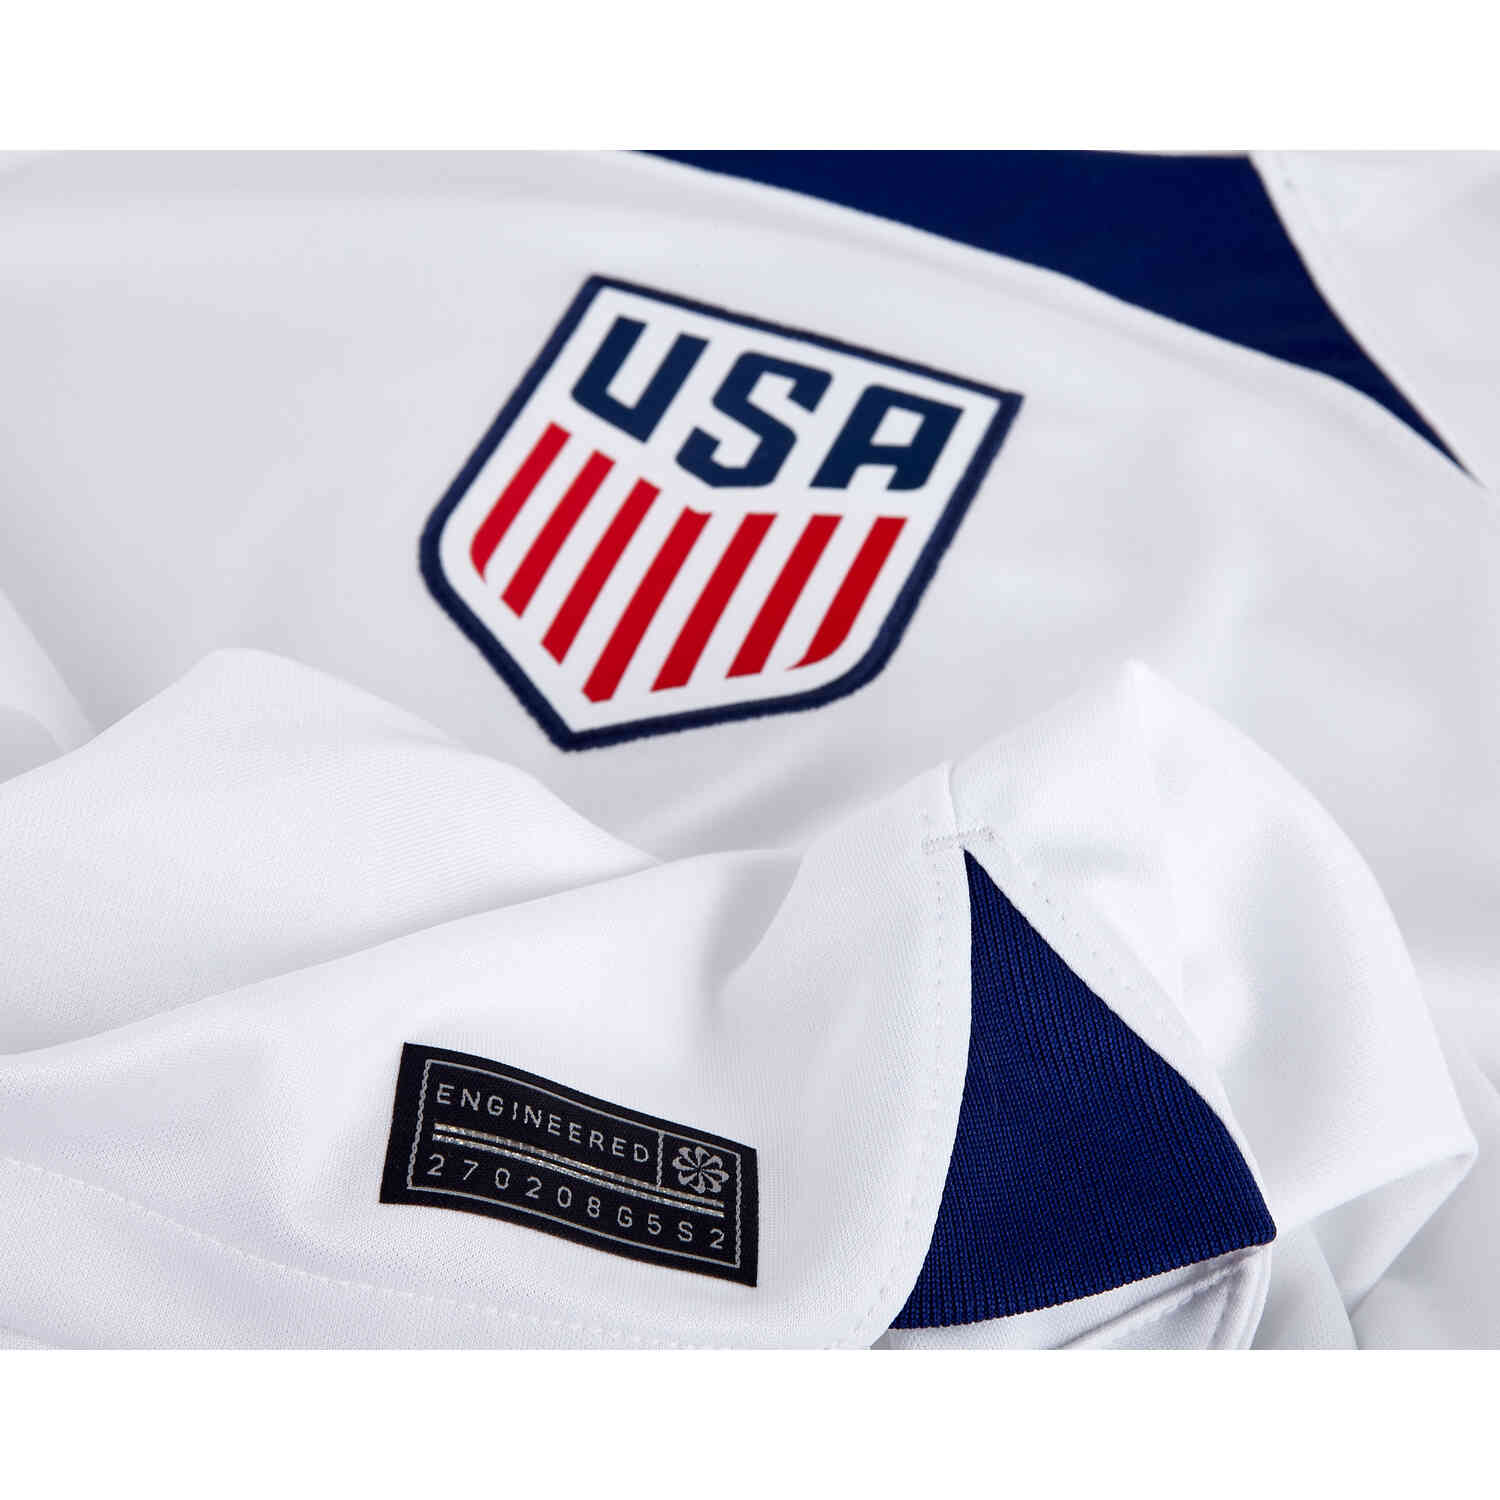 Nike Team USA 2022 Olympic Women's Hockey Jersey in Blue Size X-Small